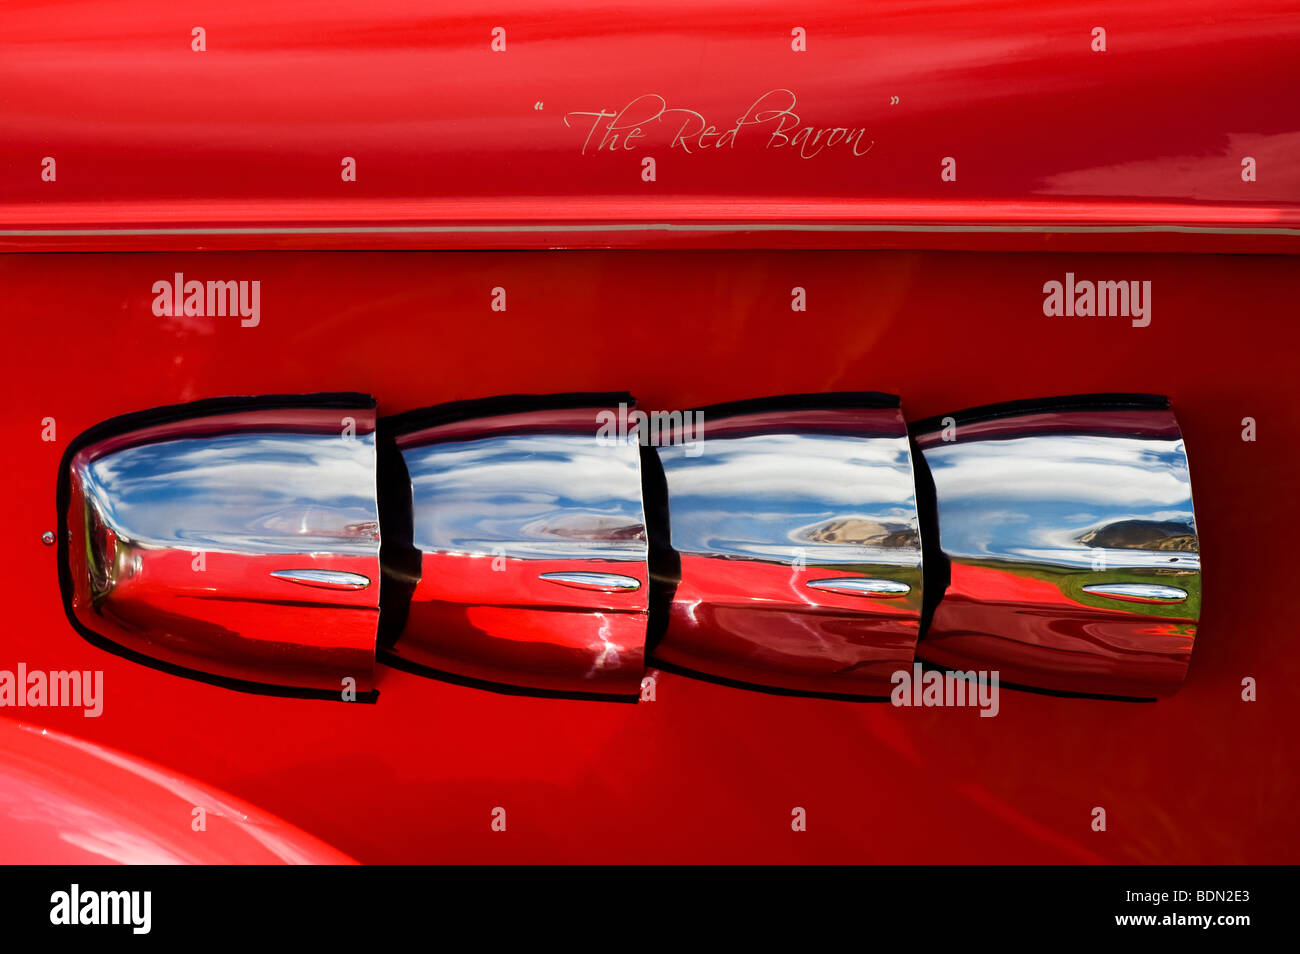 Customized red Ford Pop car details Stock Photo